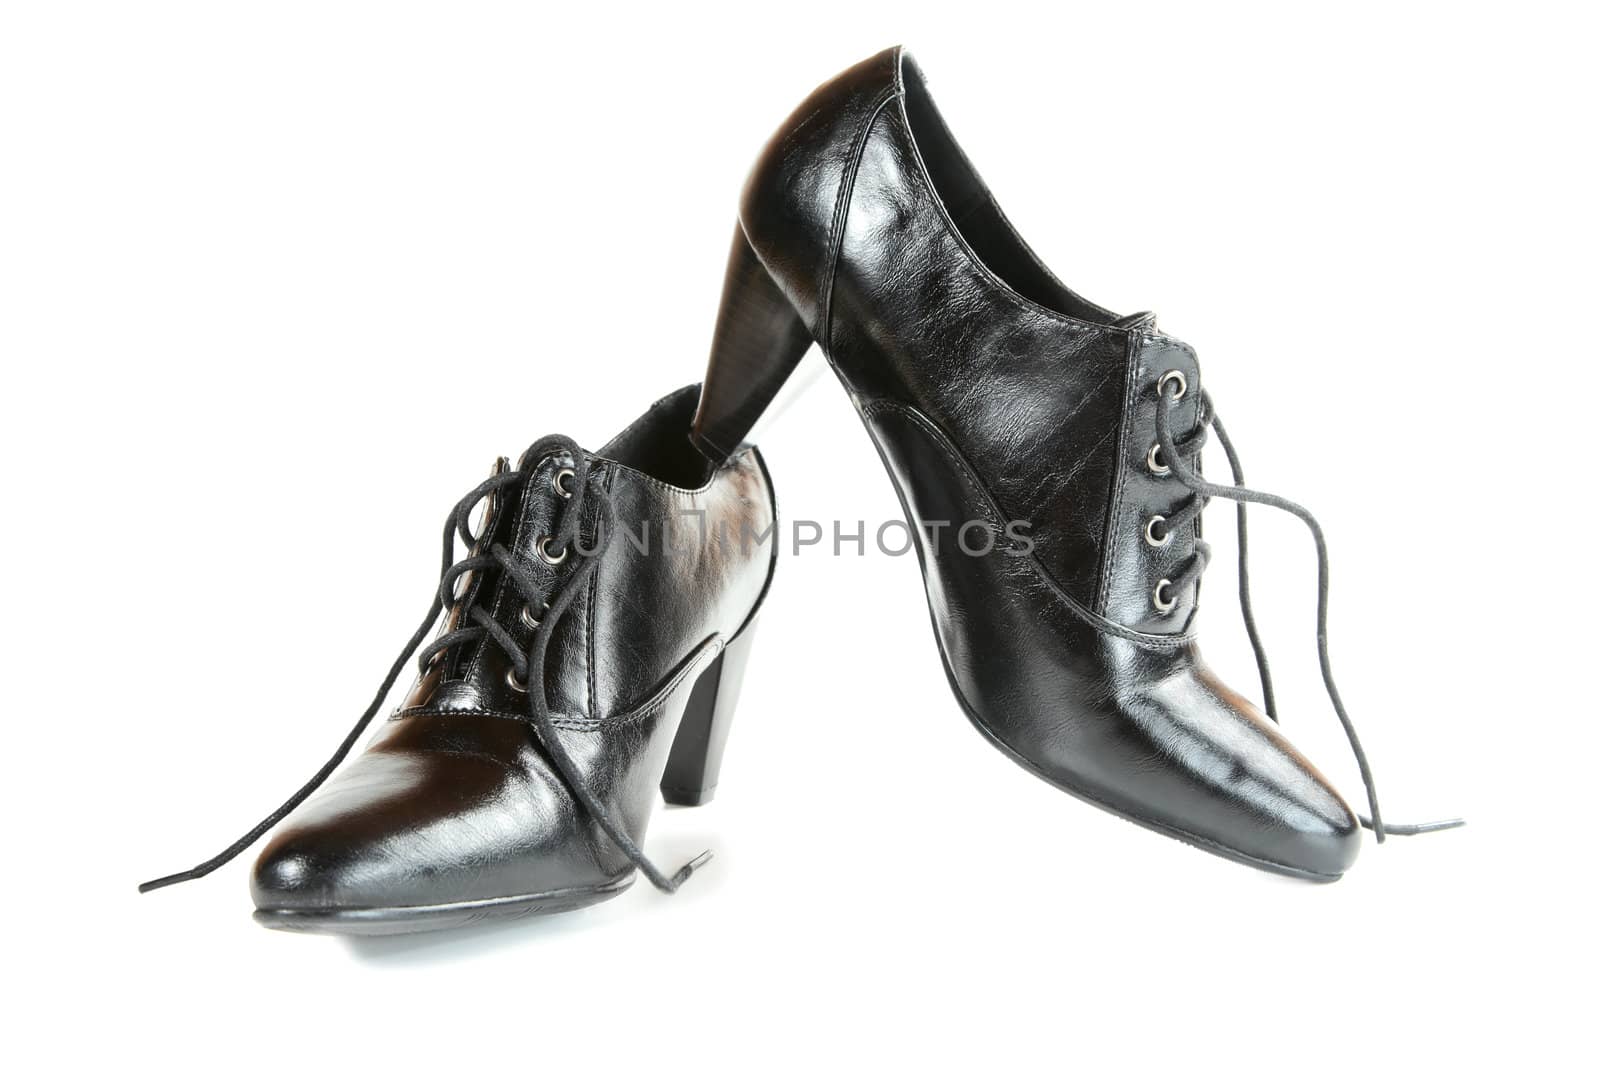 black female shoes isolated  by alarich